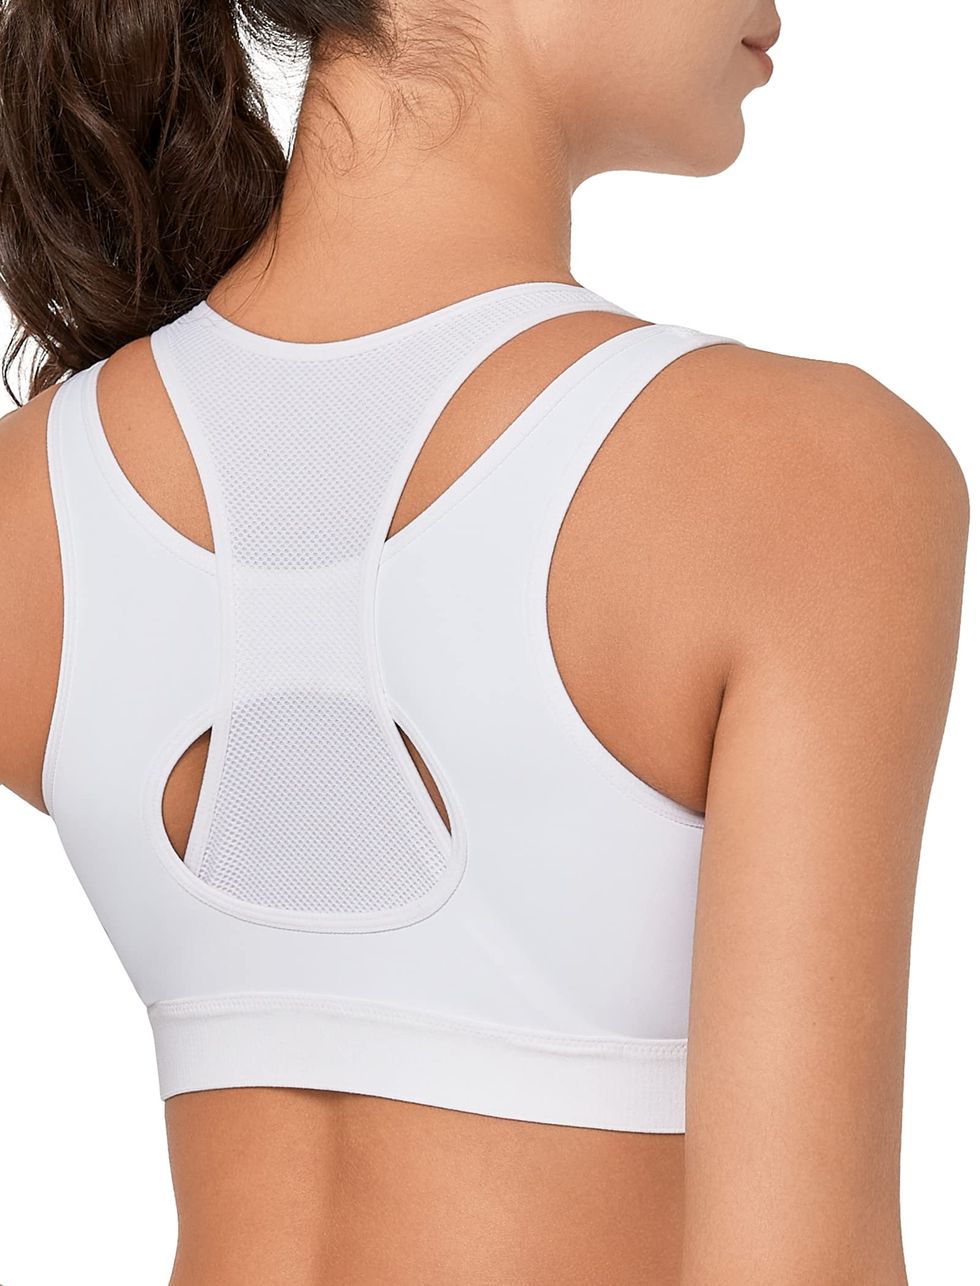 Aiithuug Front Zipper Closure Sports Bras for Running Yoga Workout